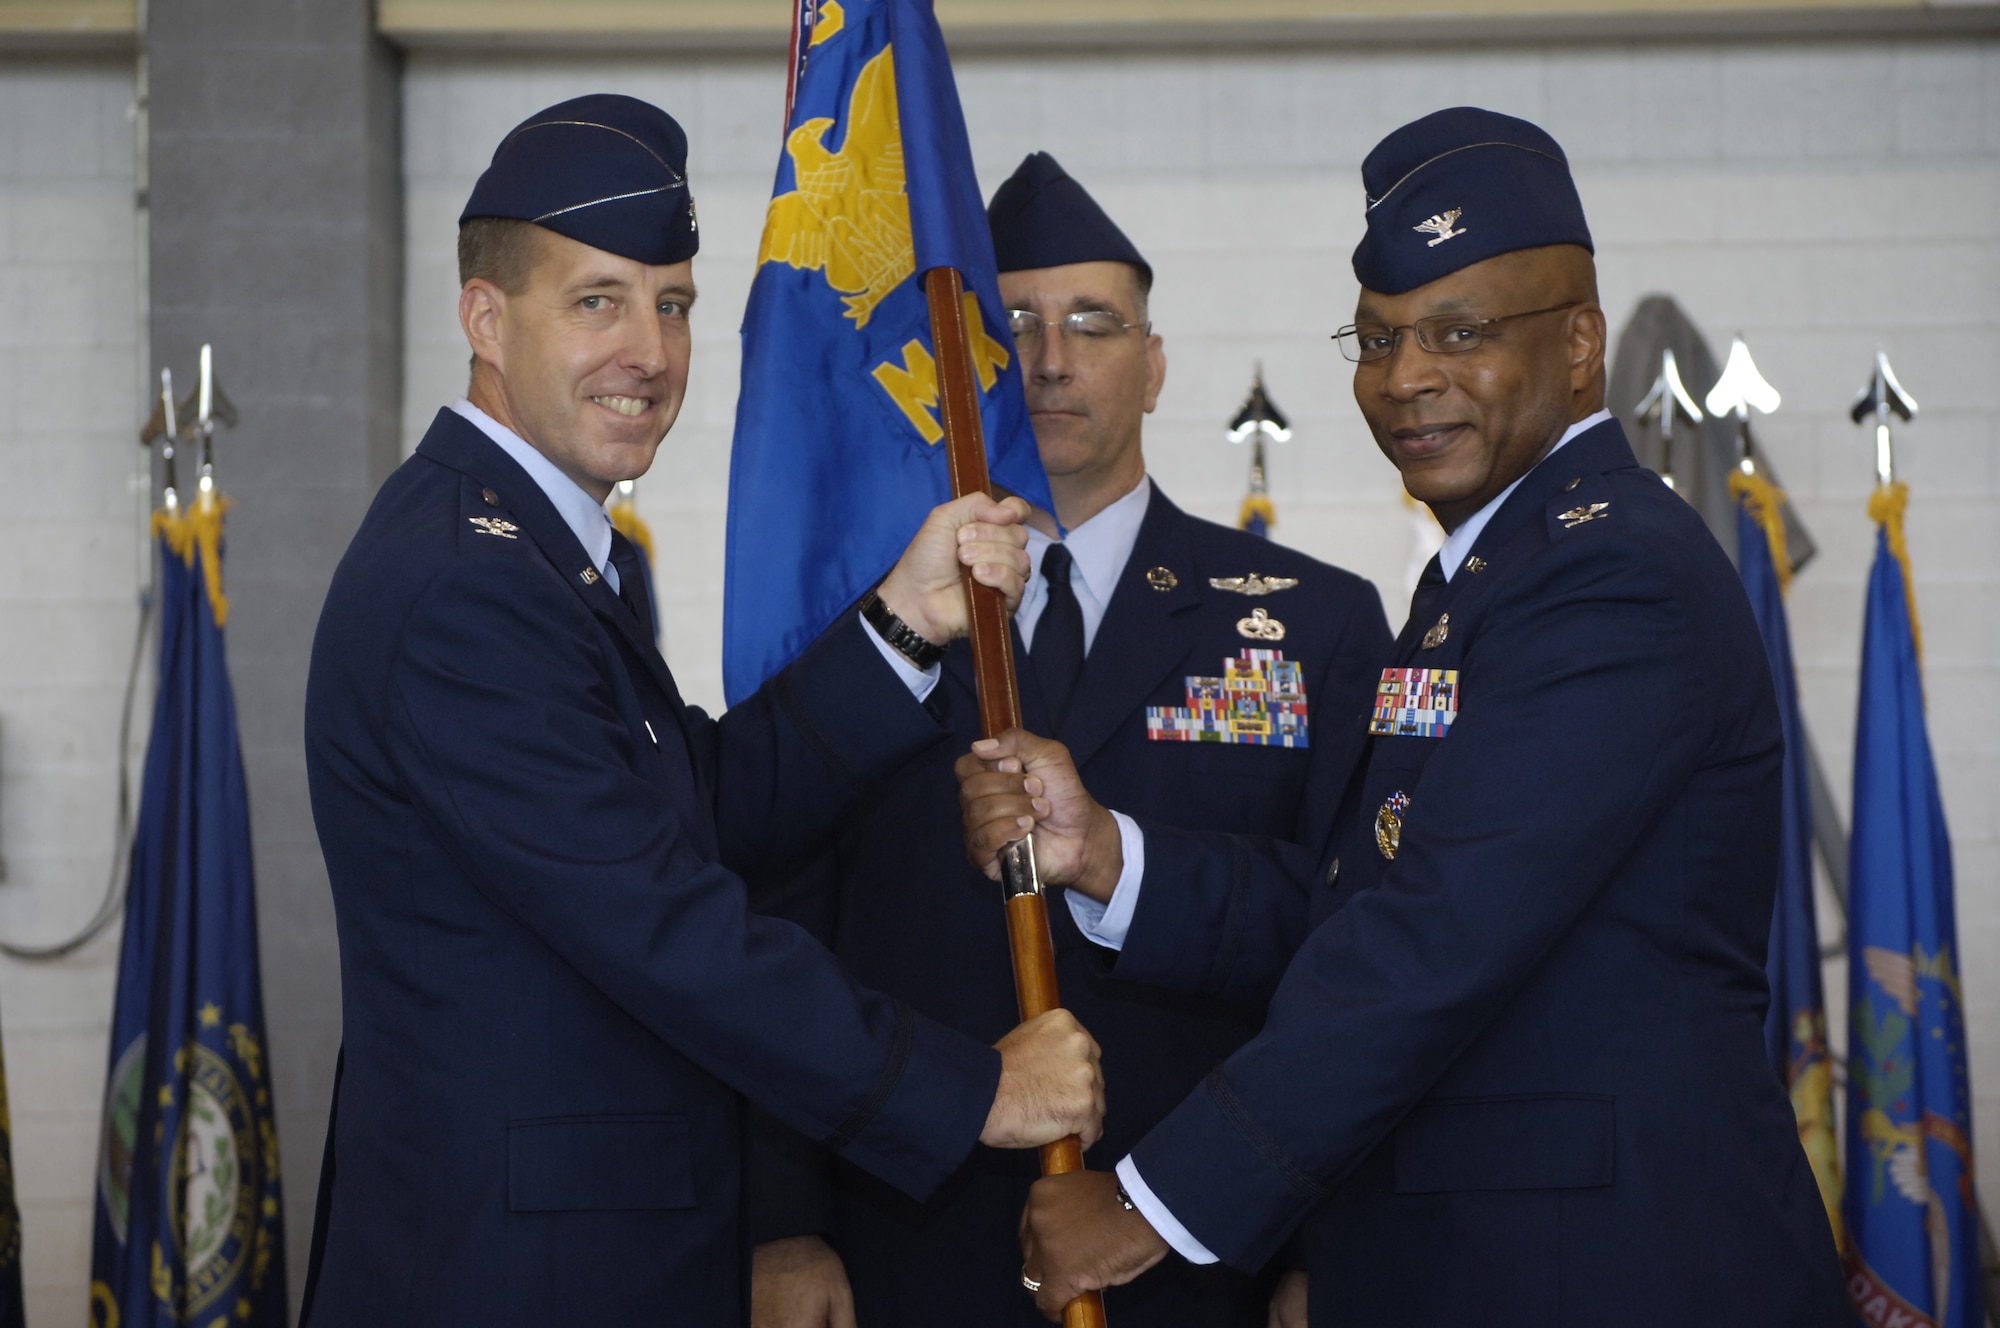 Col. André L. Kennedy, right, accepts command of the 552nd Maintenance Group from 552nd Air Control Wing Commander Col. Jay Bickley during an Aug. 13 ceremony. Colonel Kennedy replaces Col. Stella Smith, who retired after a 24-year Air Force career. (Air Force photo by Darren D. Heusel)